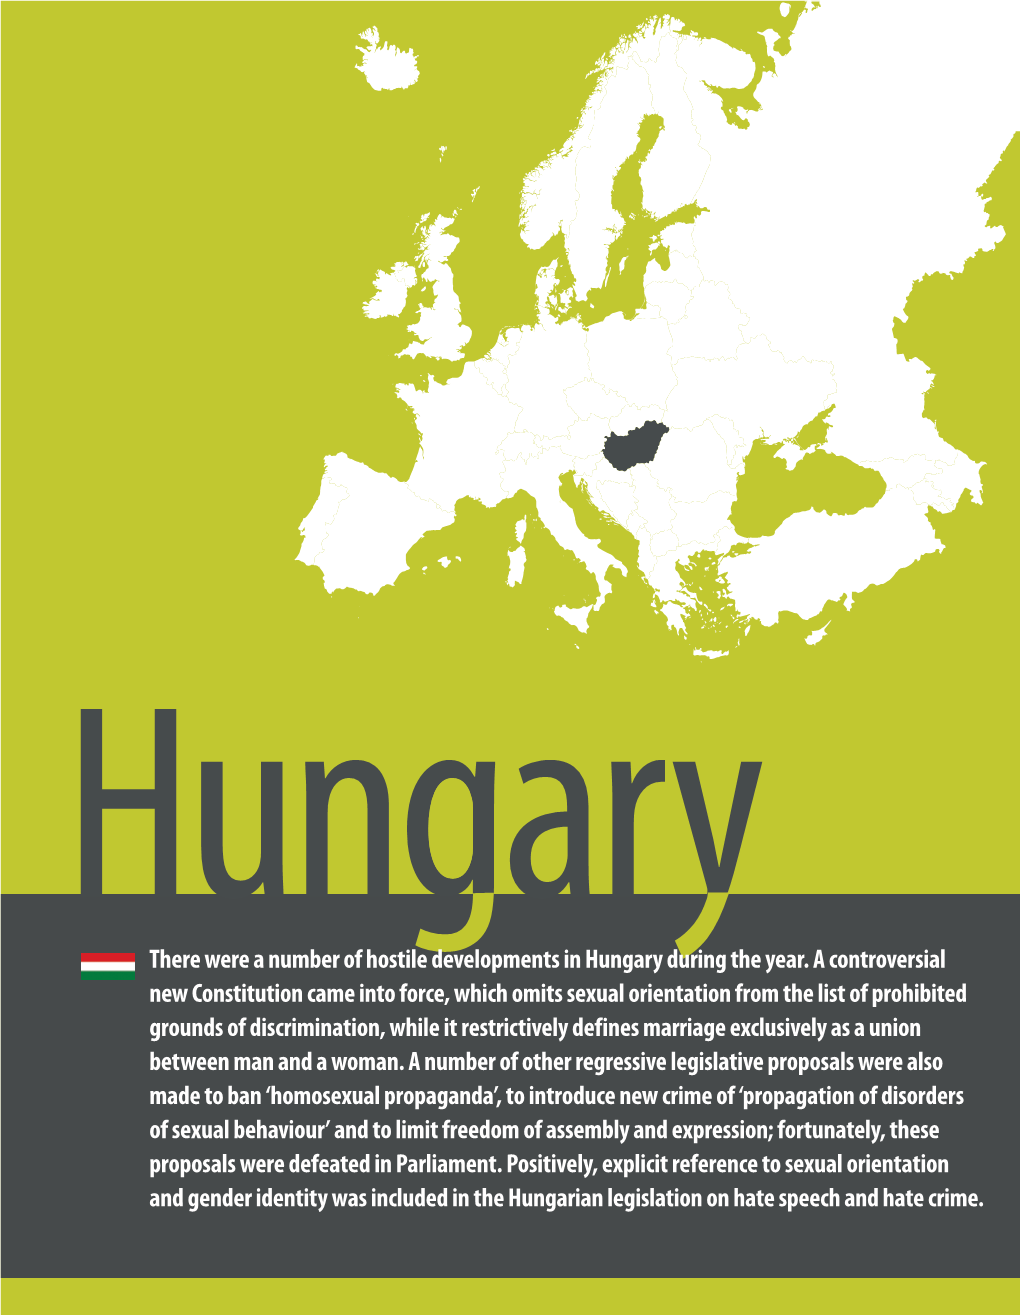 There Were a Number of Hostile Developments in Hungary During the Year